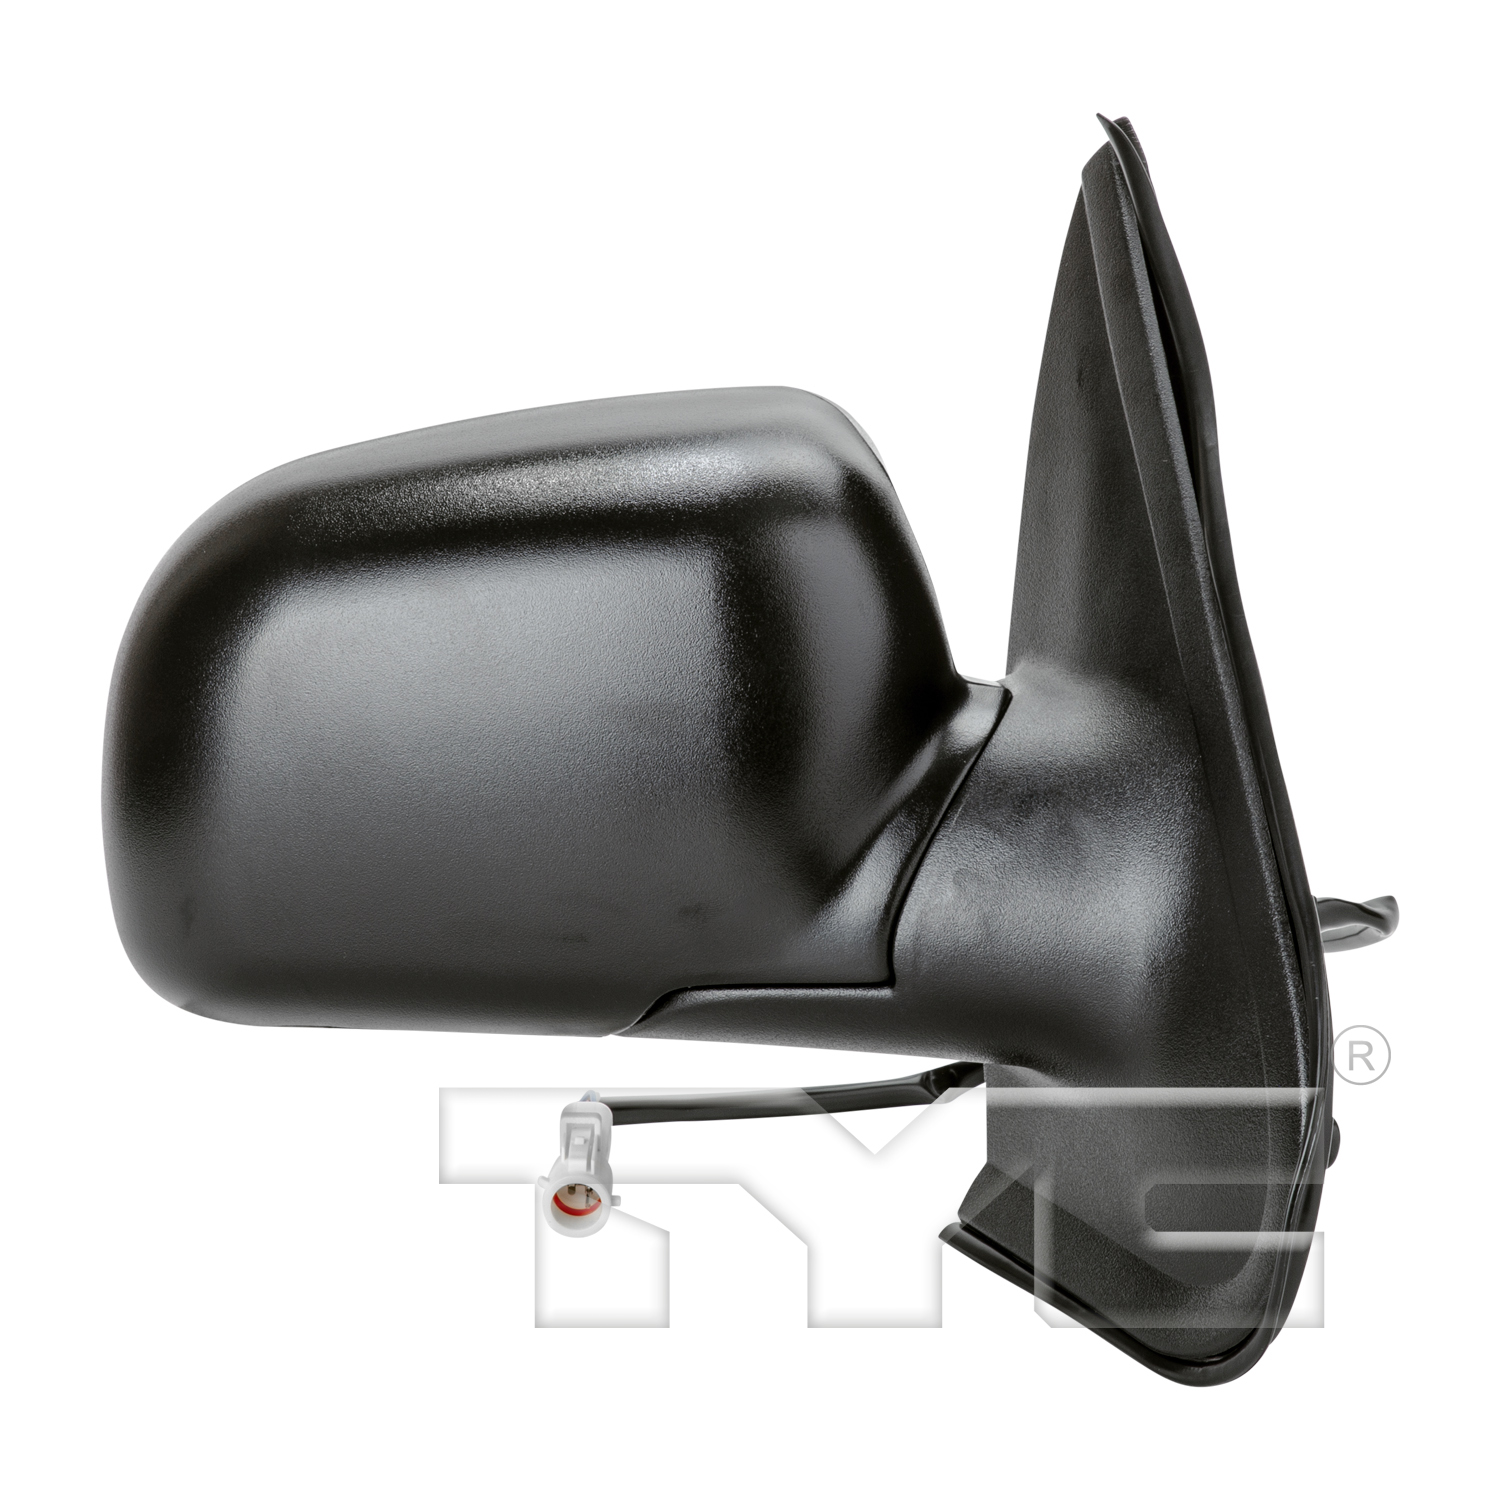 Aftermarket MIRRORS for FORD - EXPLORER SPORT, EXPLORER SPORT,01-03,RT Mirror outside rear view